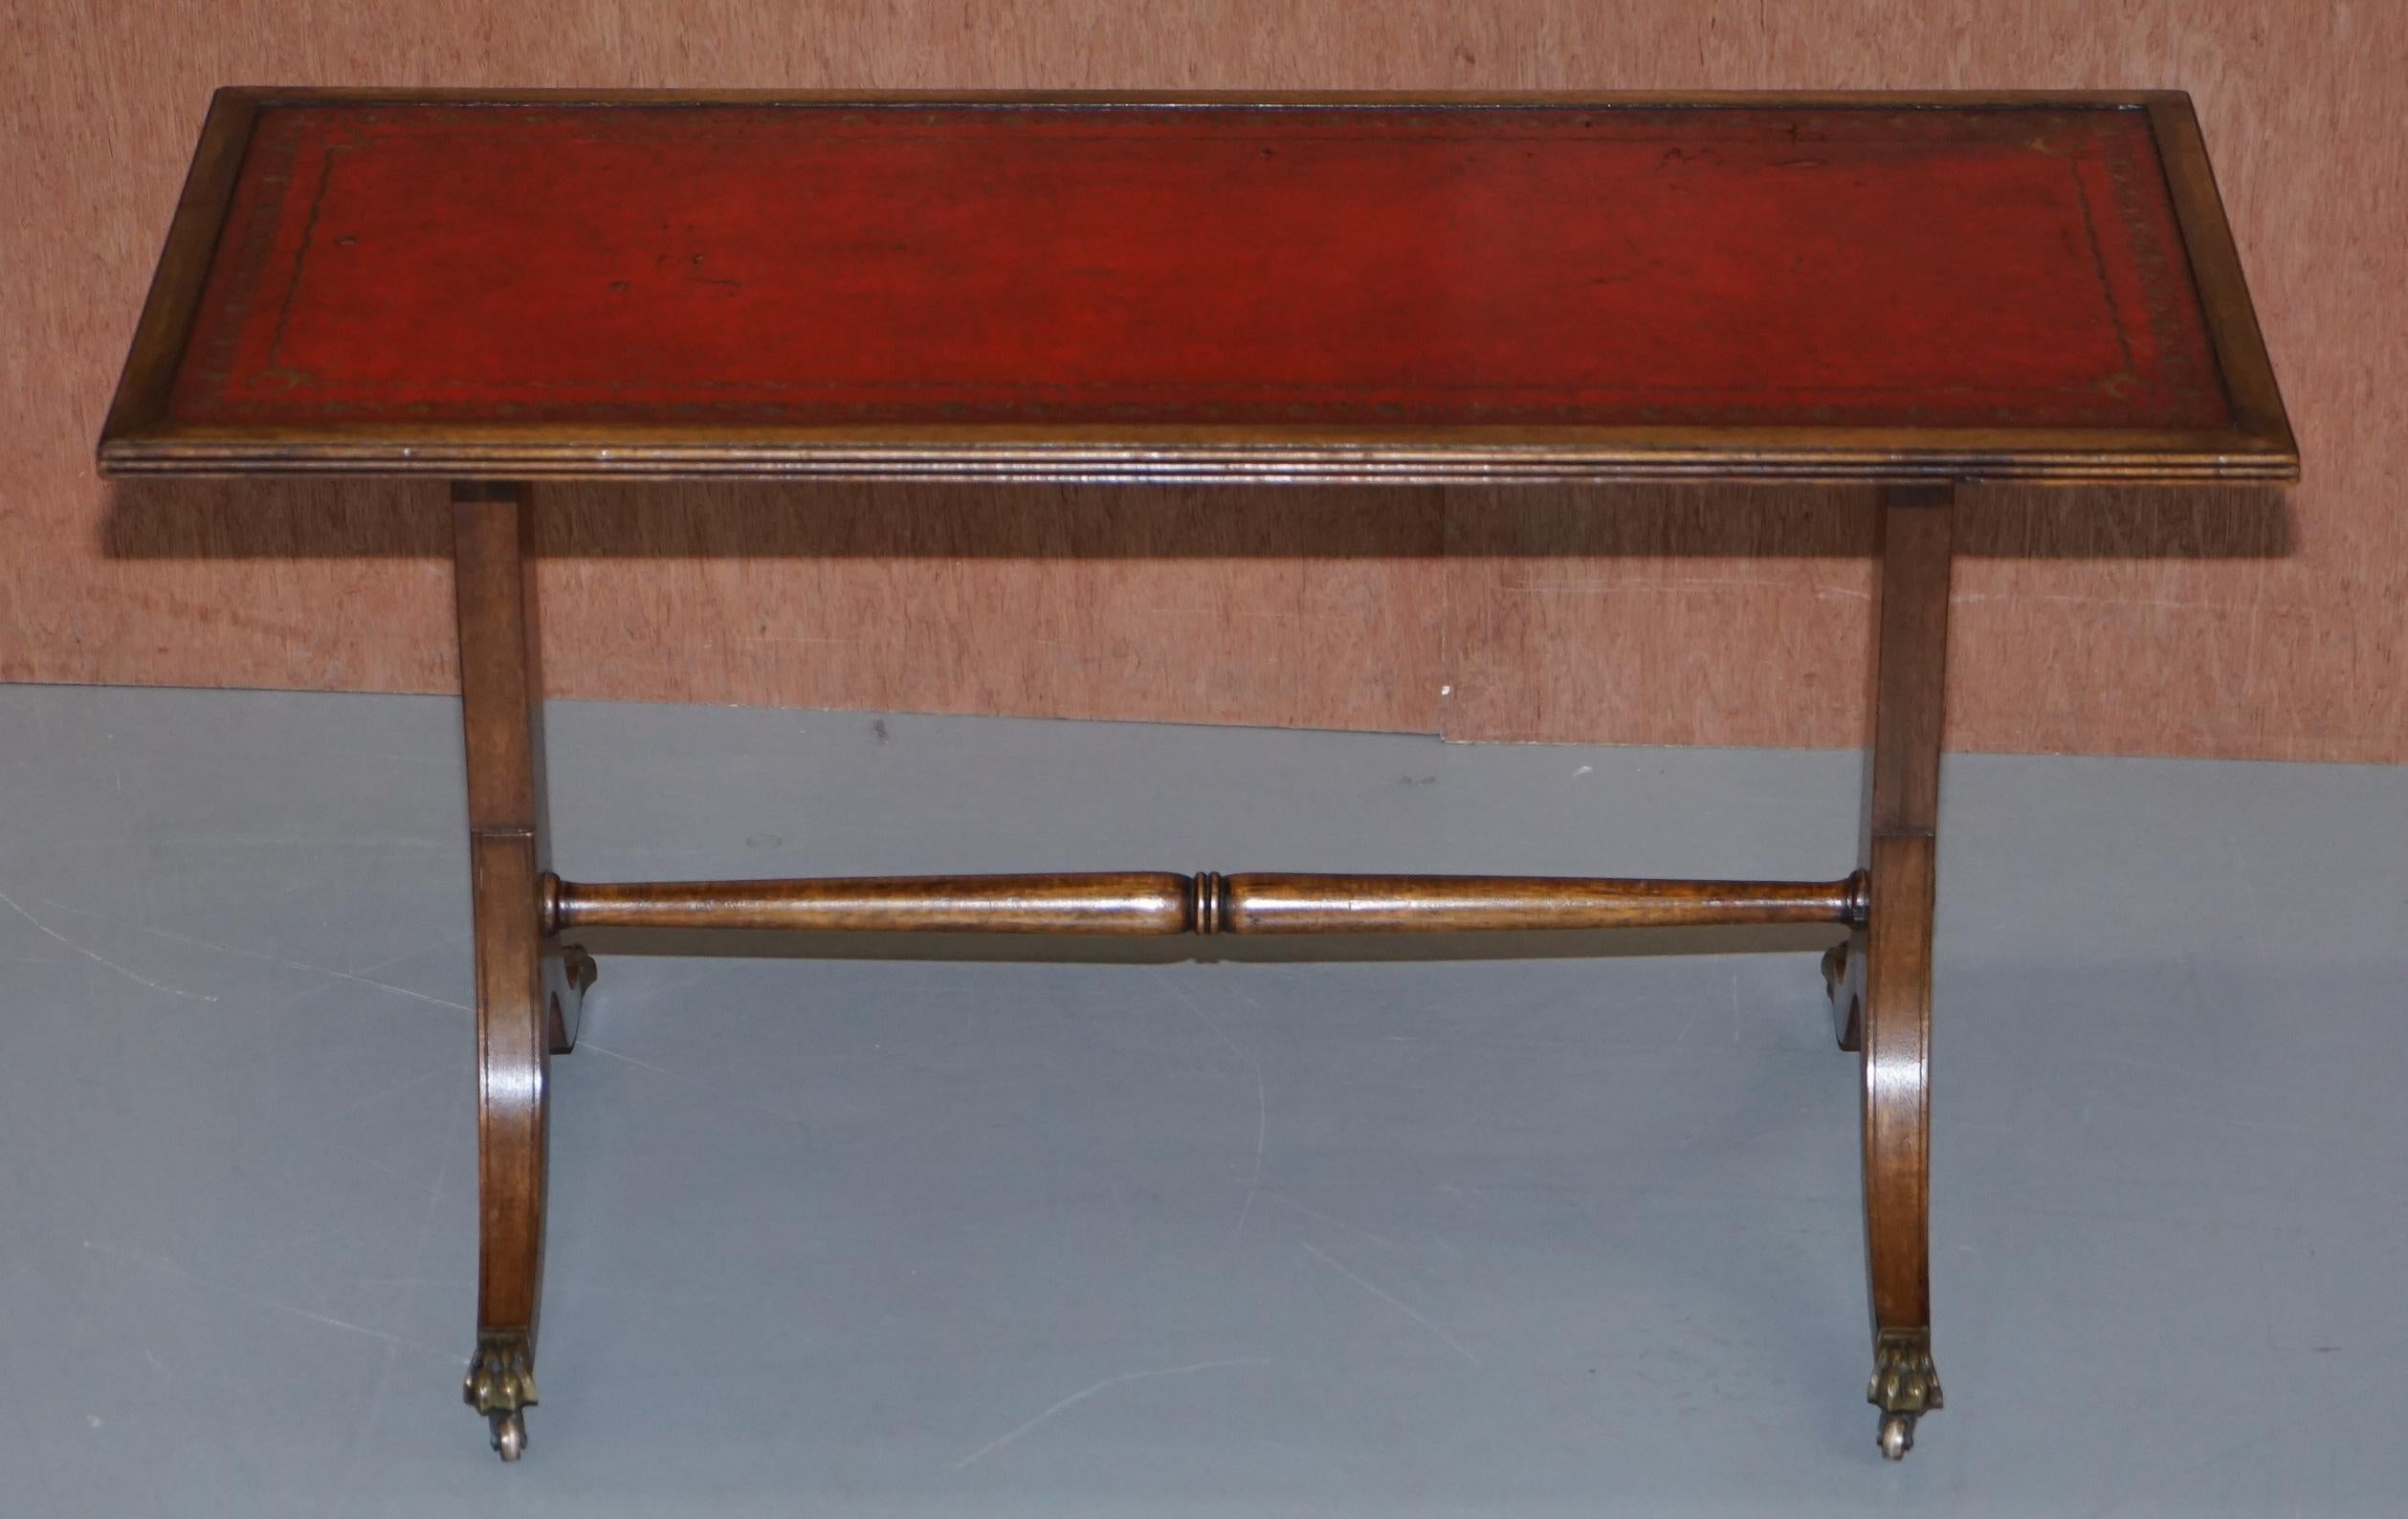 We are delighted to offer for sale this nice vintage light mahogany coffee table with oxblood leather top

A good versatile coffee or cocktail table, this is circa 40-60 years old, made by Bevan Funnell, the frame is light mahogany, the leather